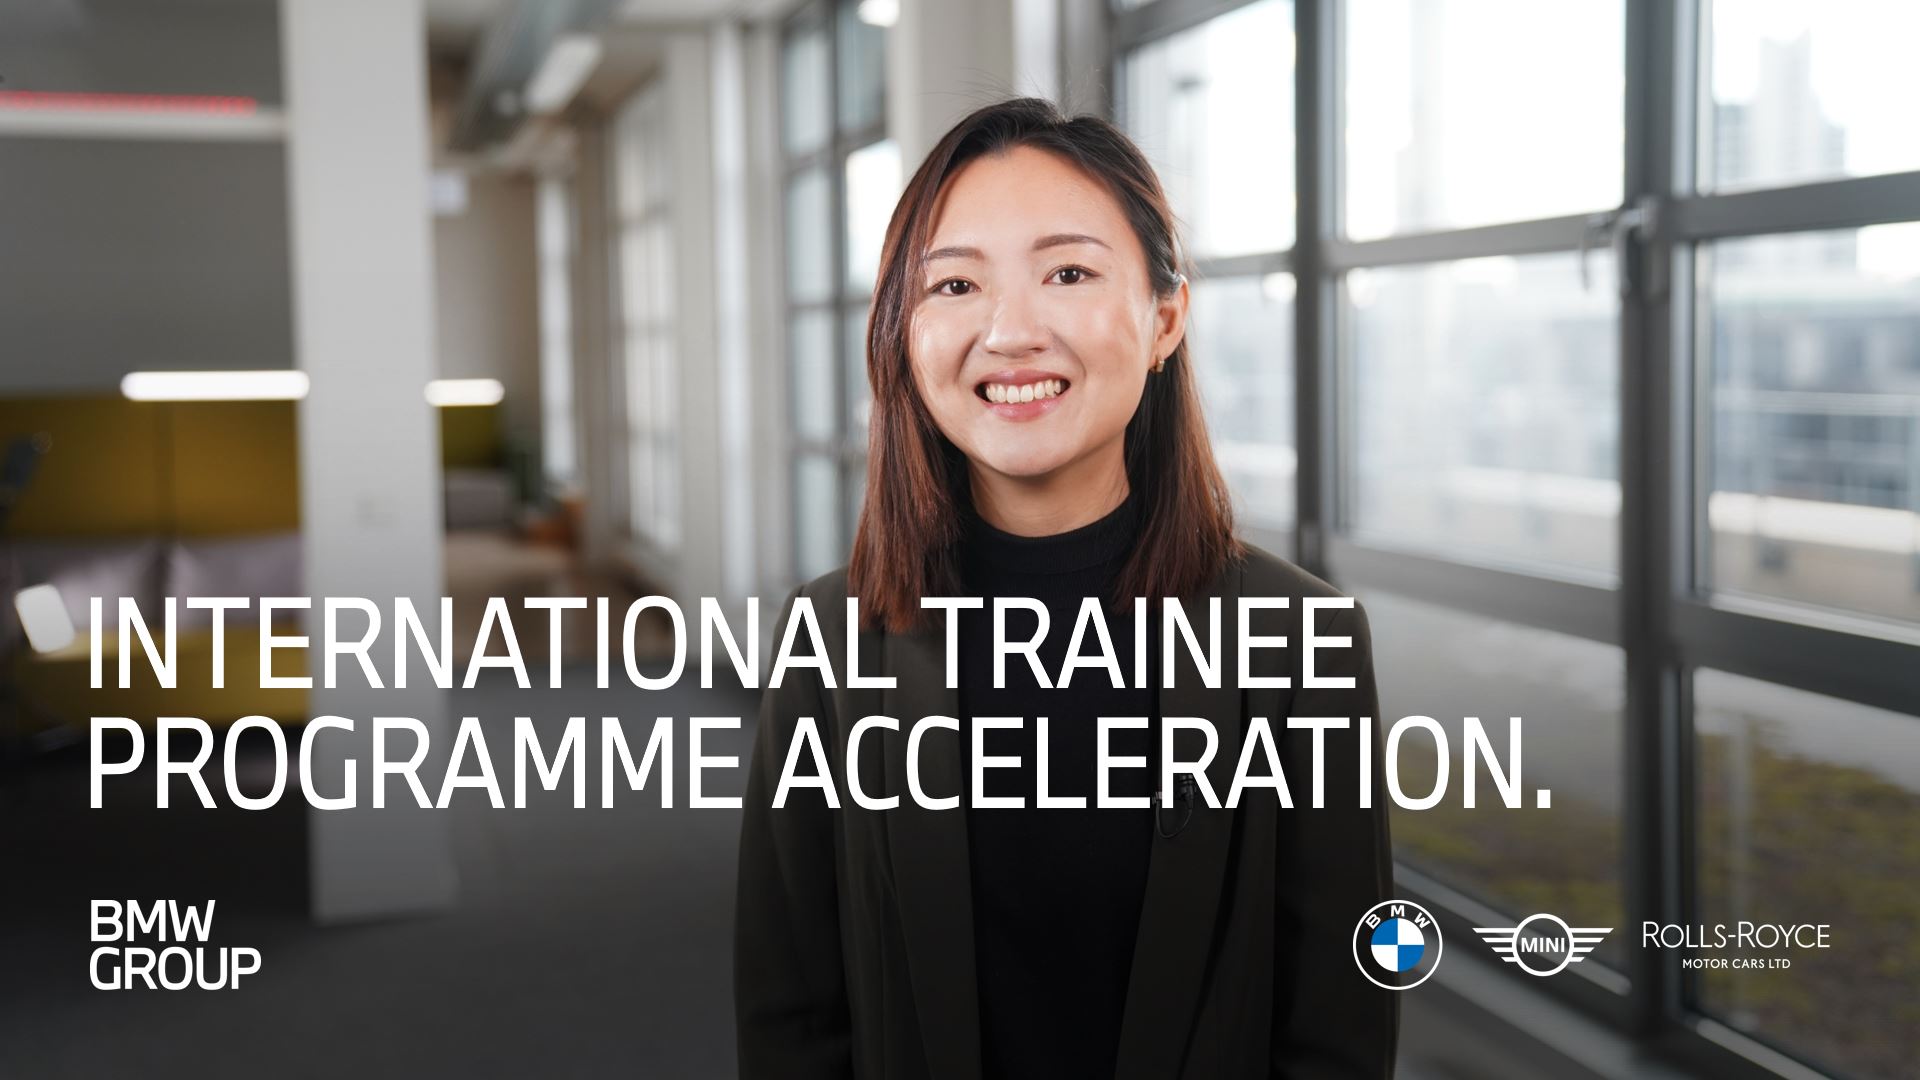 BMW Group Trainee Programme AcceleratiON Video.